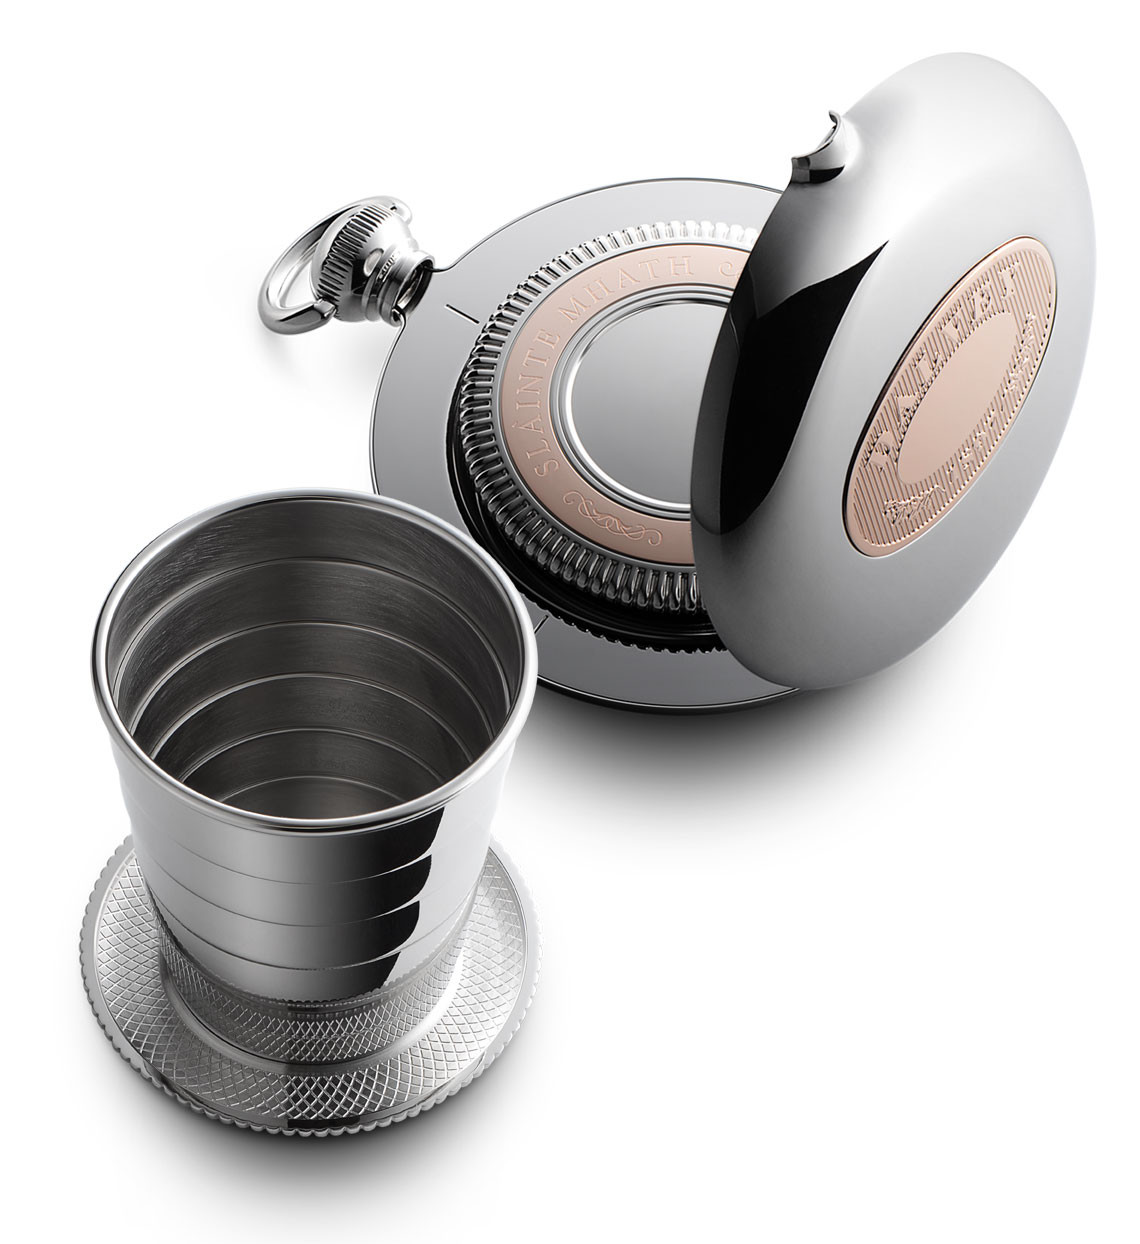 Voyager Expedition Flask with Cup - Dalvey